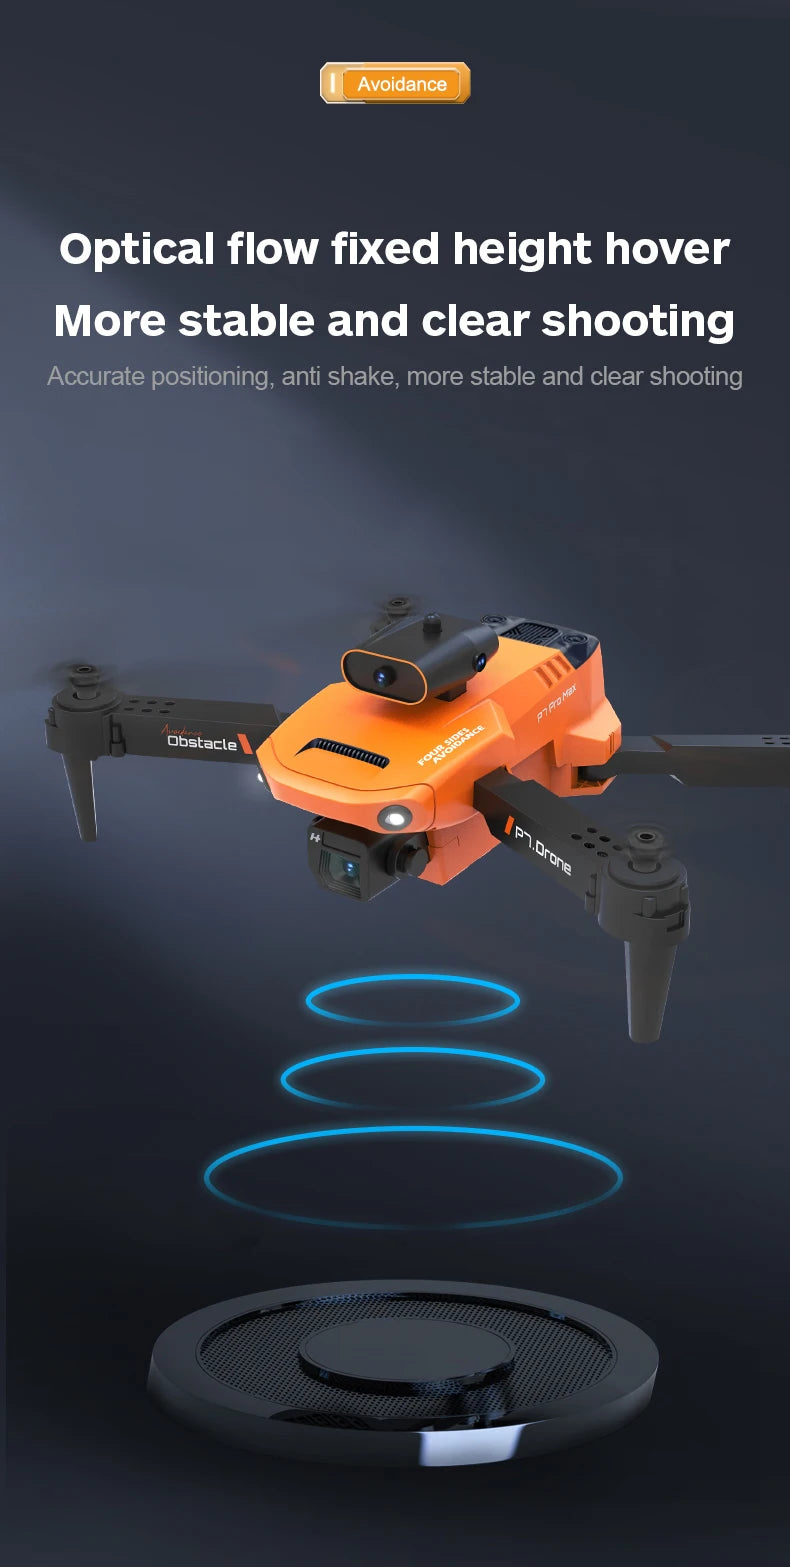 KBDFA NEW P7 Mini Drone, avoidance optical flow fixed height hover more stable and clear shooting .